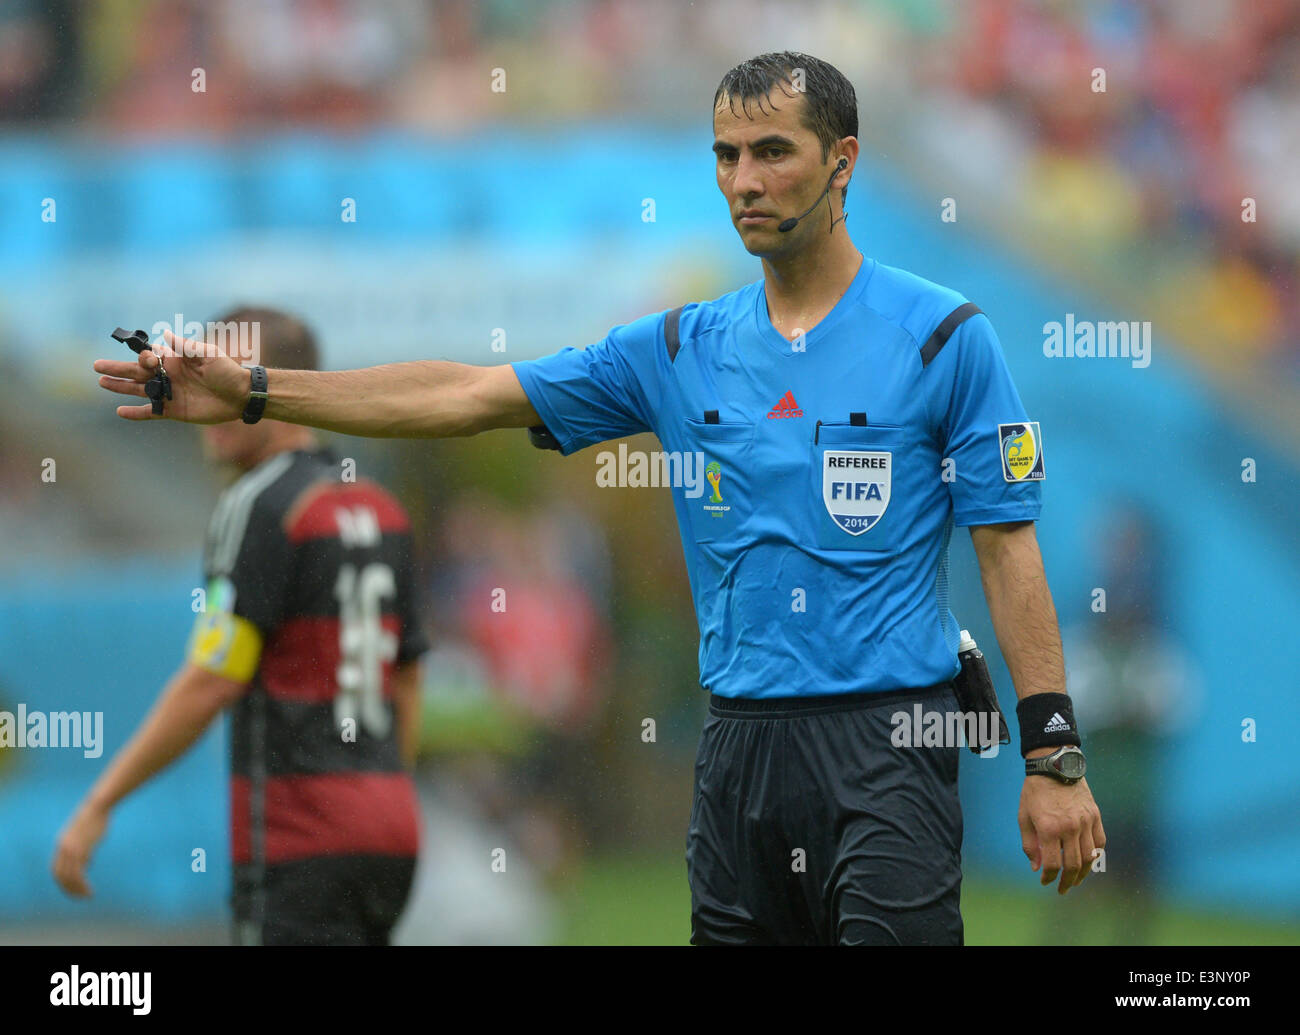 Recife, Brazil. 26th June, 2014. Referee Ravshan Irmatov of Uzbekistan gestures during the FIFA World Cup group G preliminary round match between the USA and Germany at Arena Pernambuco in Recife, Brazil, 26 June 2014. Photo: Thomas Eisenhuth/dpa/Alamy Live News Stock Photo